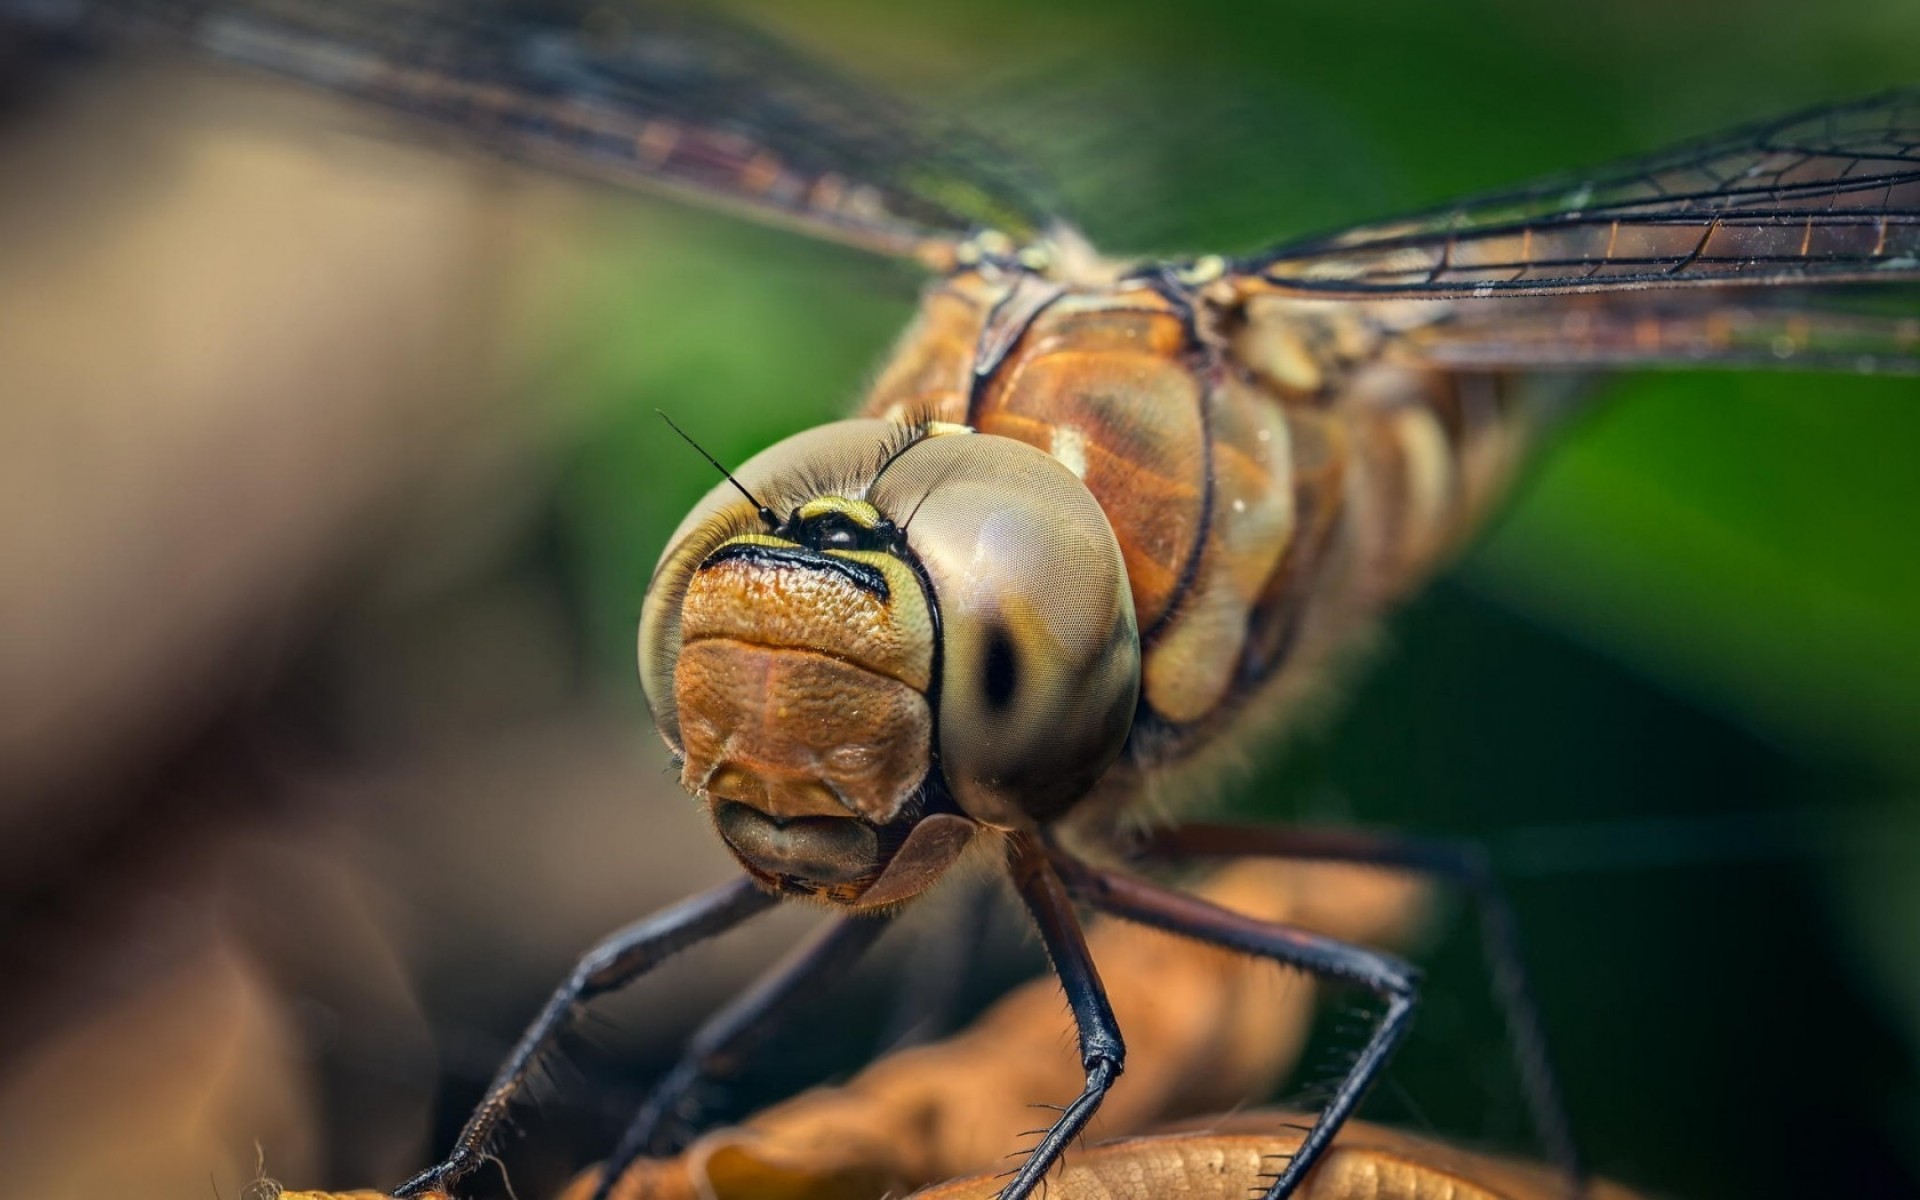 insects insect dragonfly invertebrate wildlife fly animal wing nature outdoors one garden macro